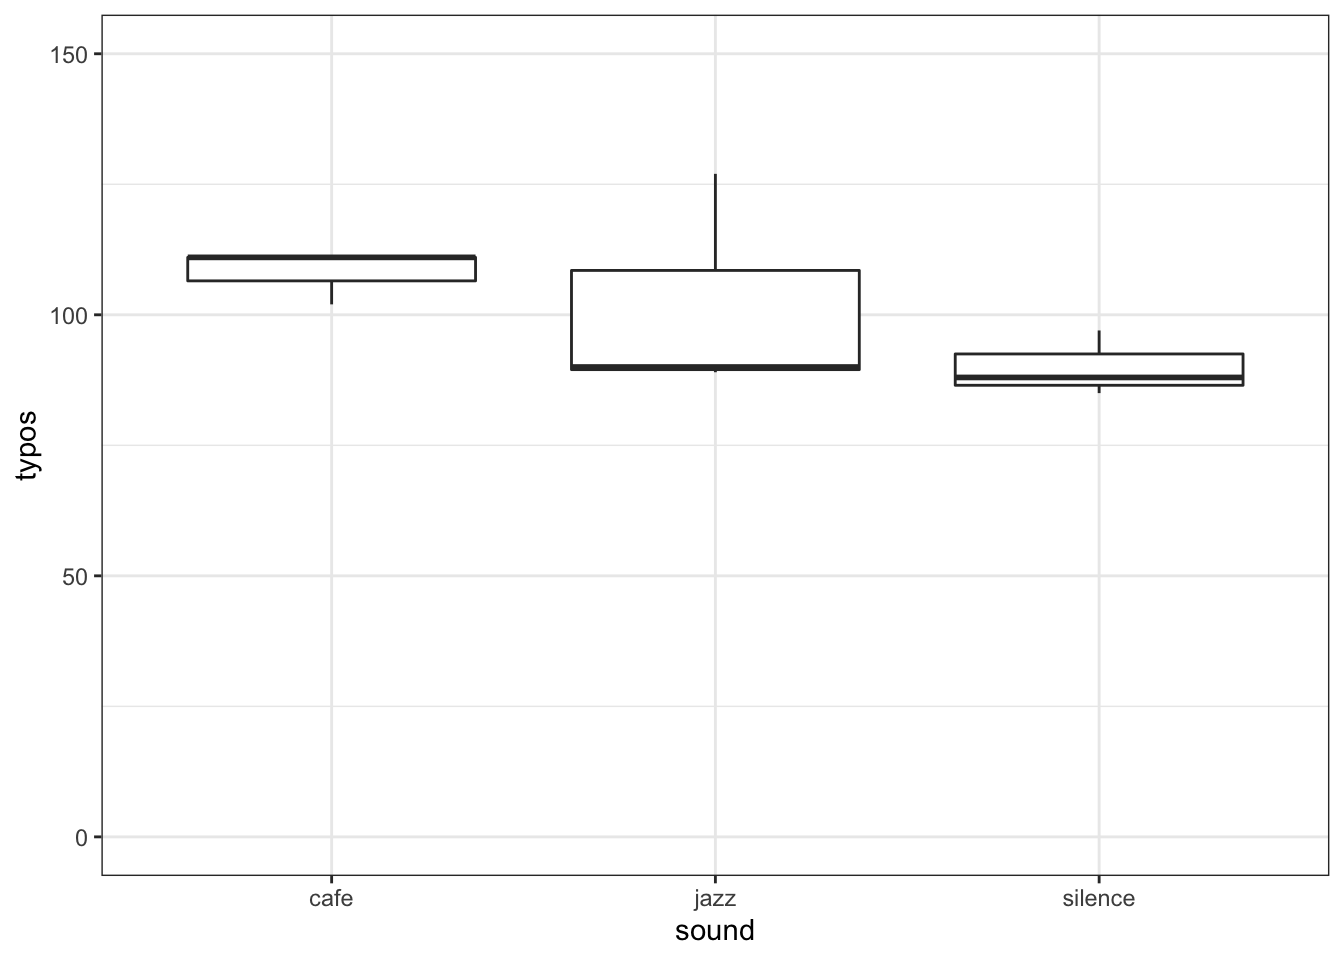 A boxplot of our data to check for homogeneity of variance